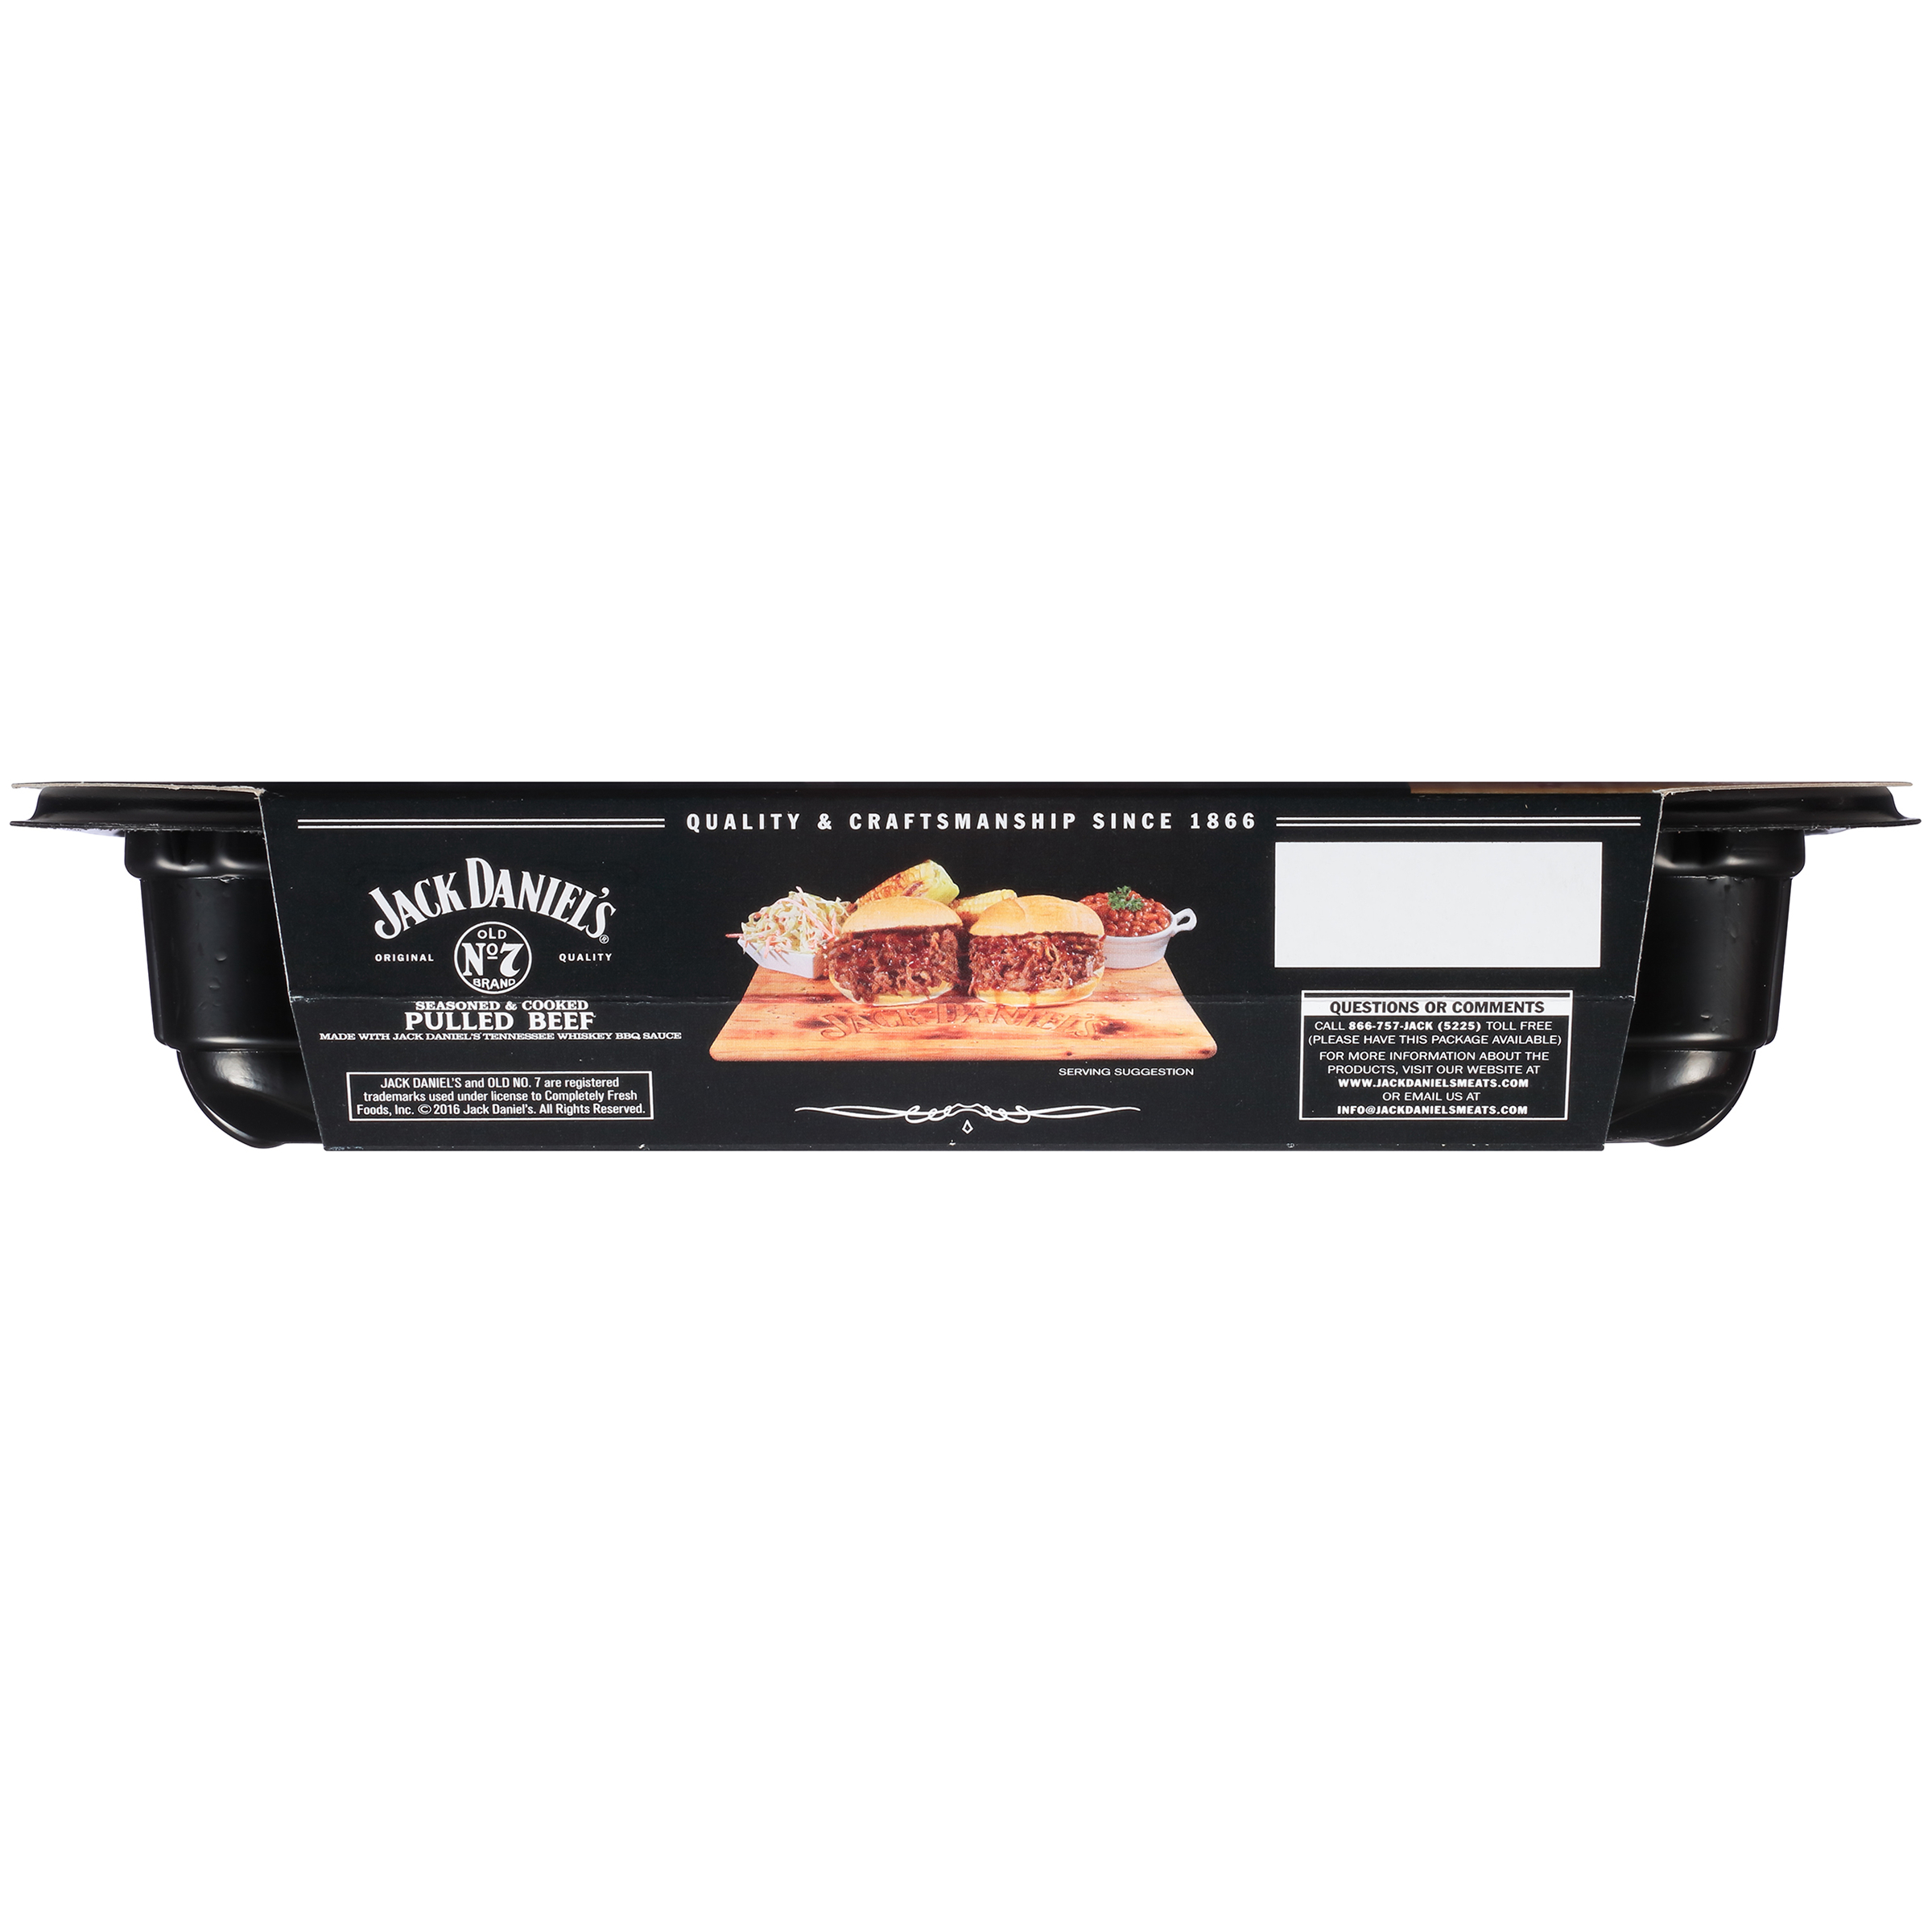 Jack Daniel's Seasoned Pulled Beef, Fully Cooked, Ready to Heat,16 oz Tray (Refrigerated) - image 12 of 13